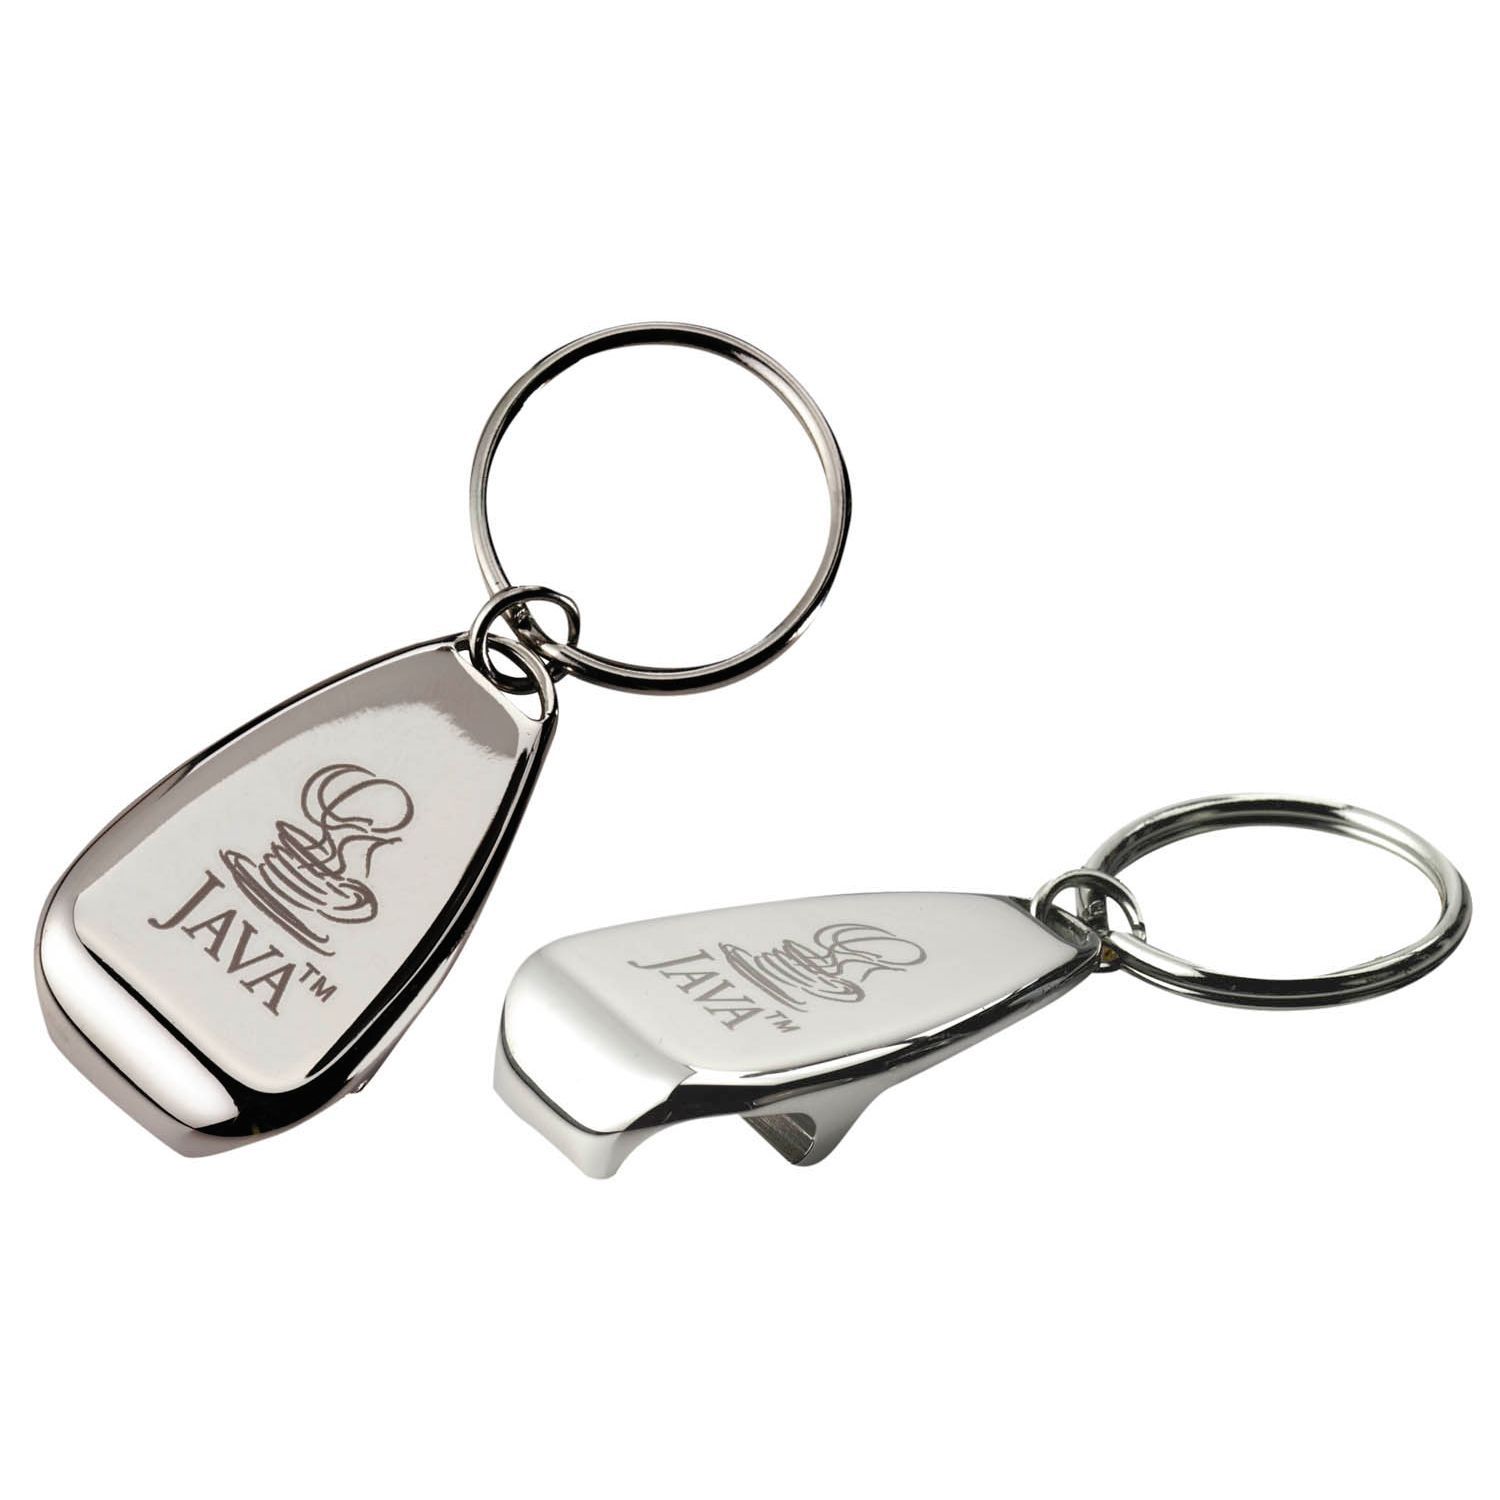 The Simplicity Bottle Opener Keychain